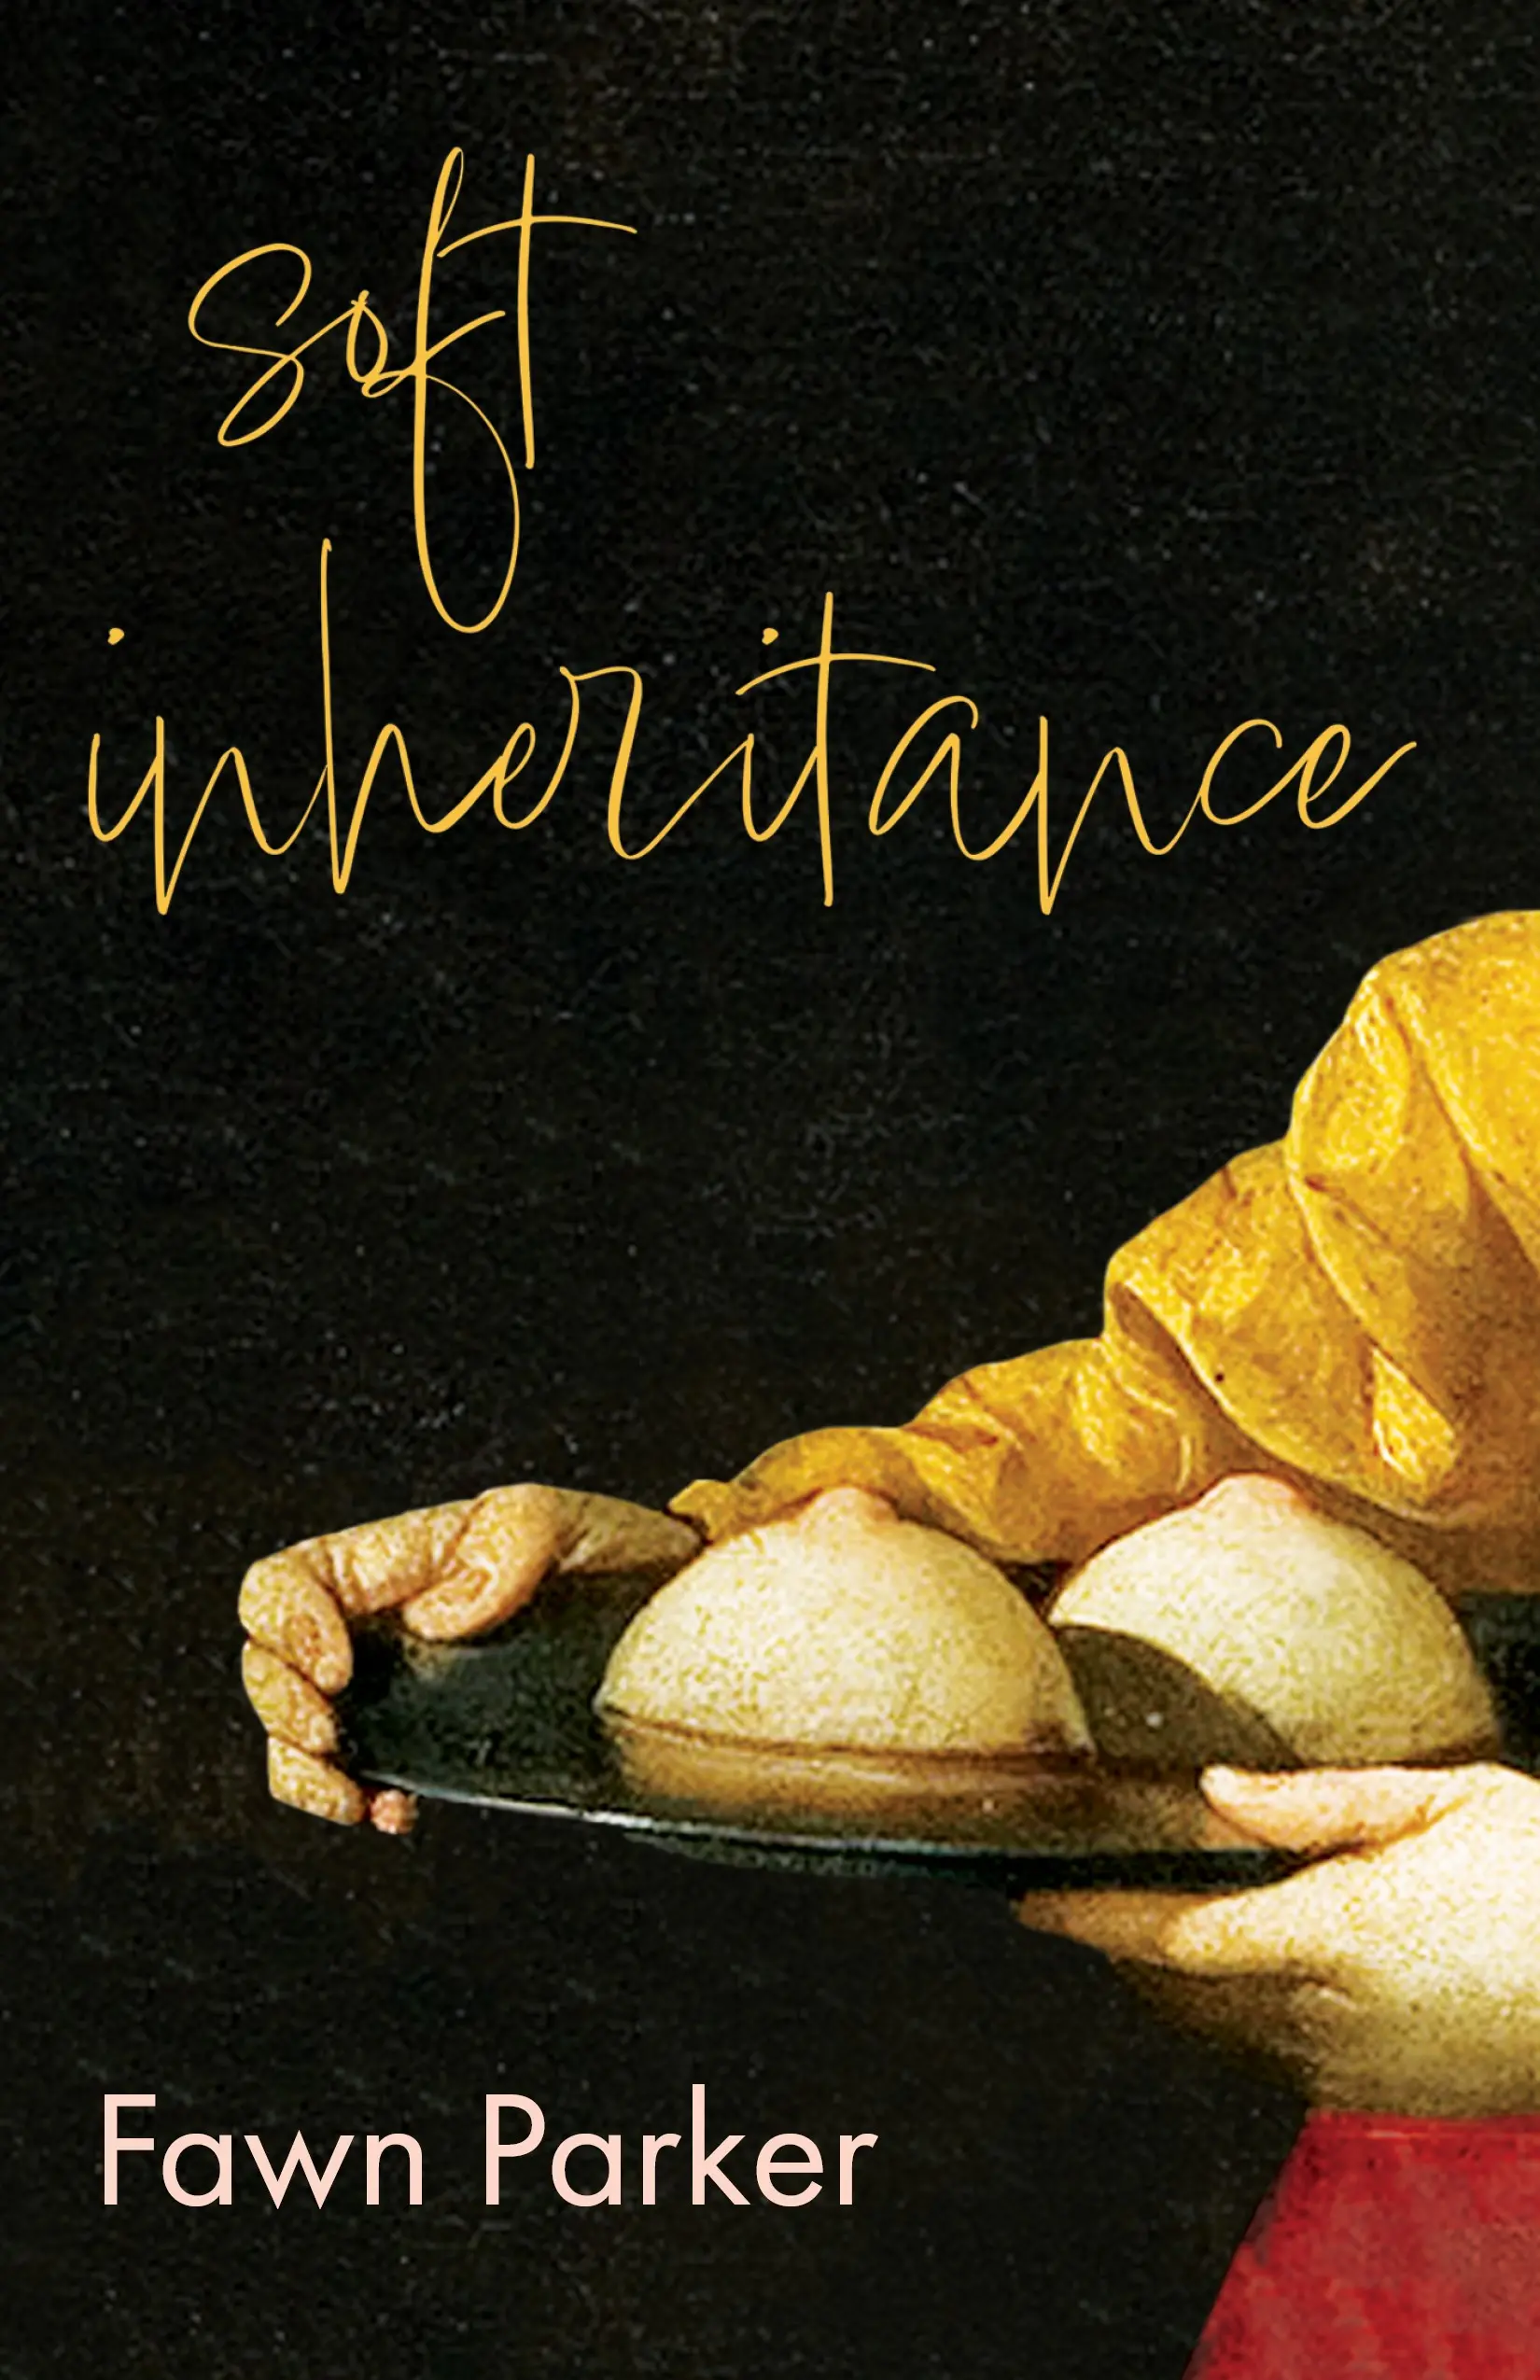 The cover of Soft Inheritance by Fawn Parker.